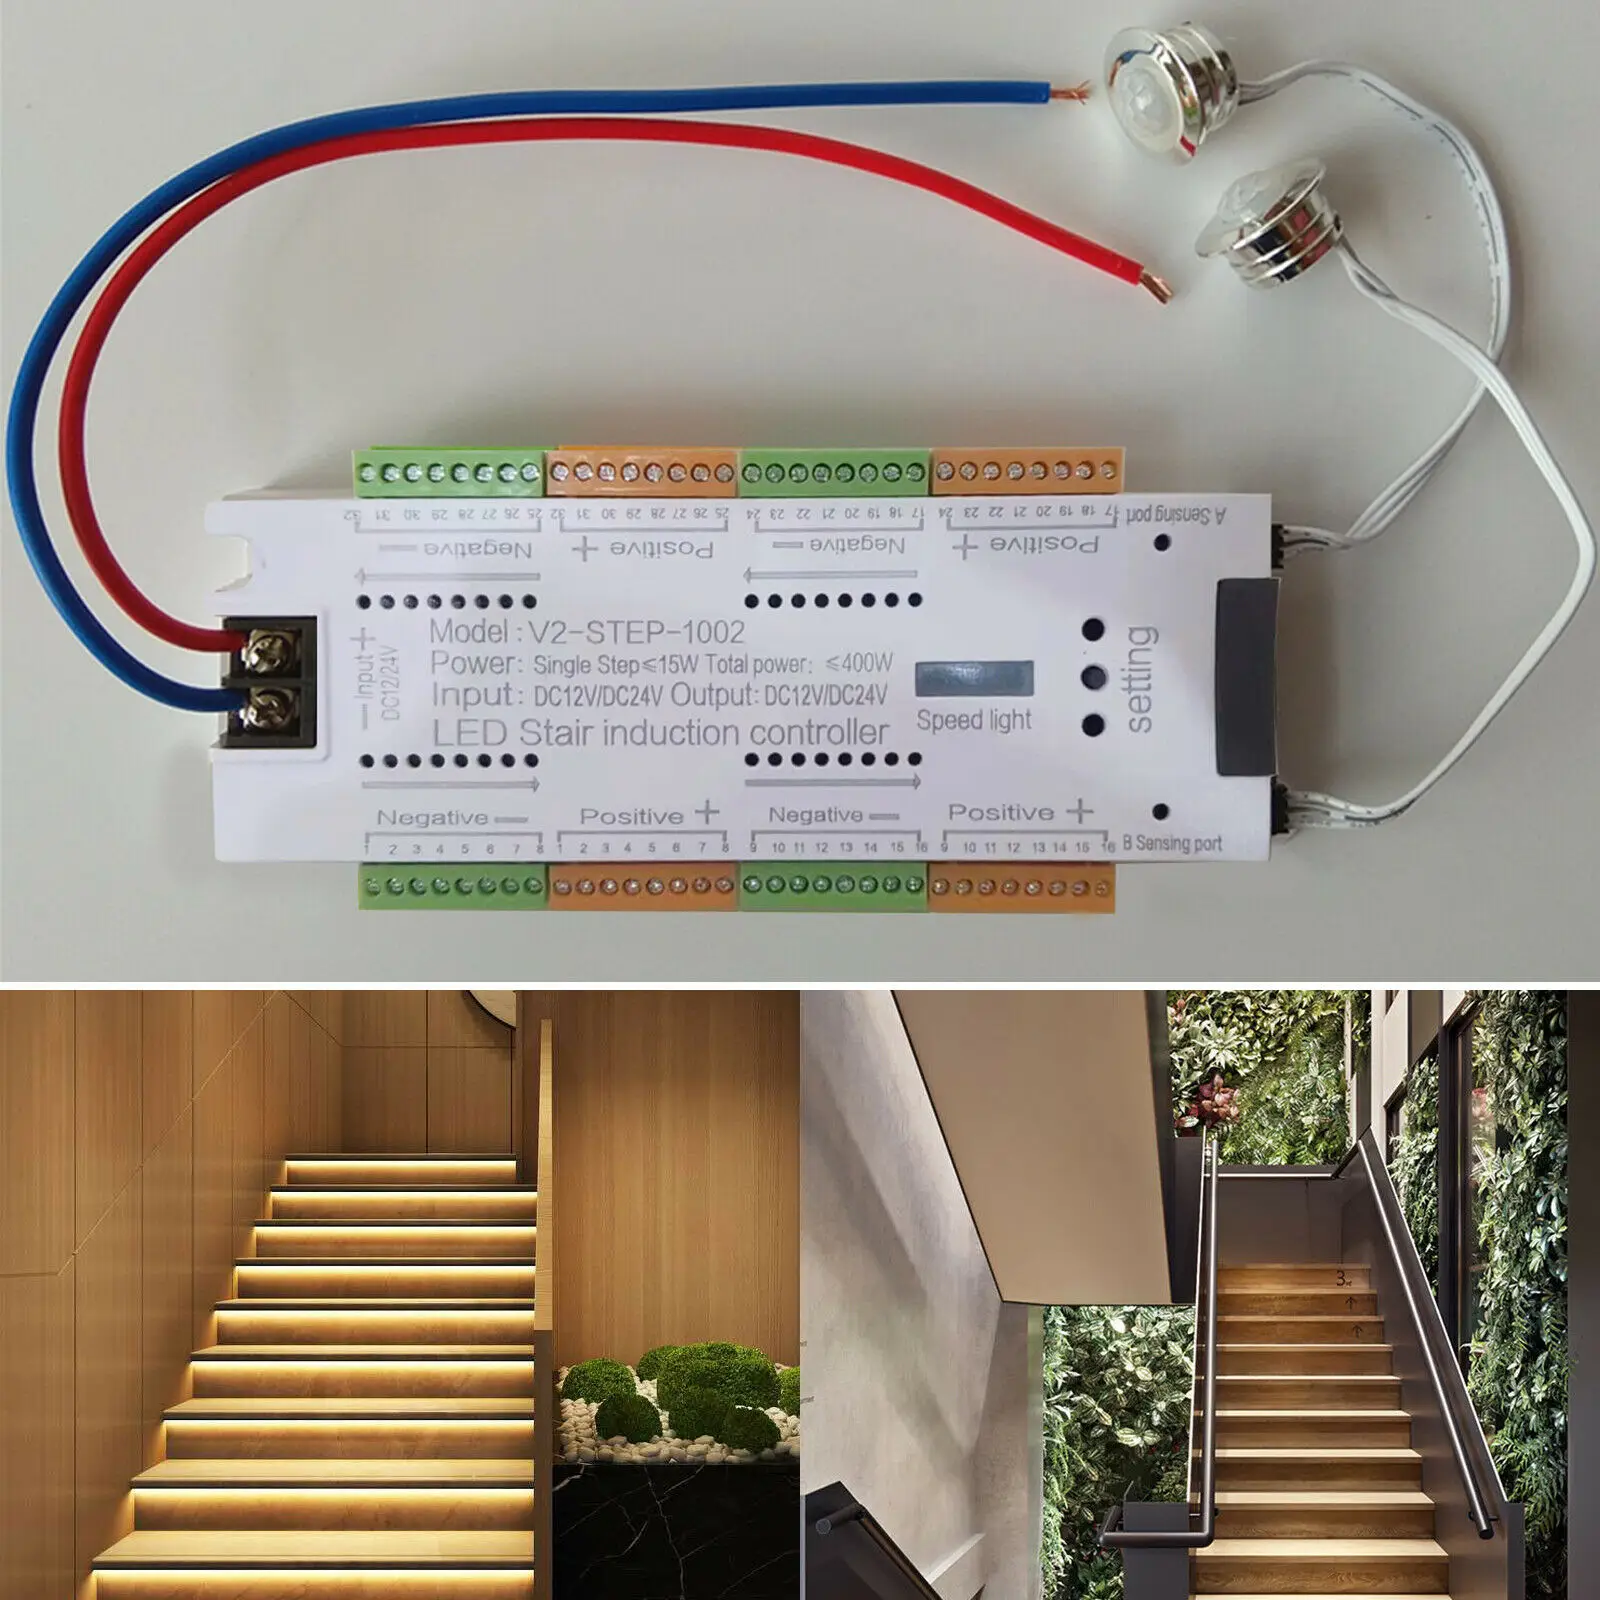 motion-sensor-led-controller-stair-light-step-system-≤350w-32-channel-stair-sensor-automatic-extension-cord-100-brand-new